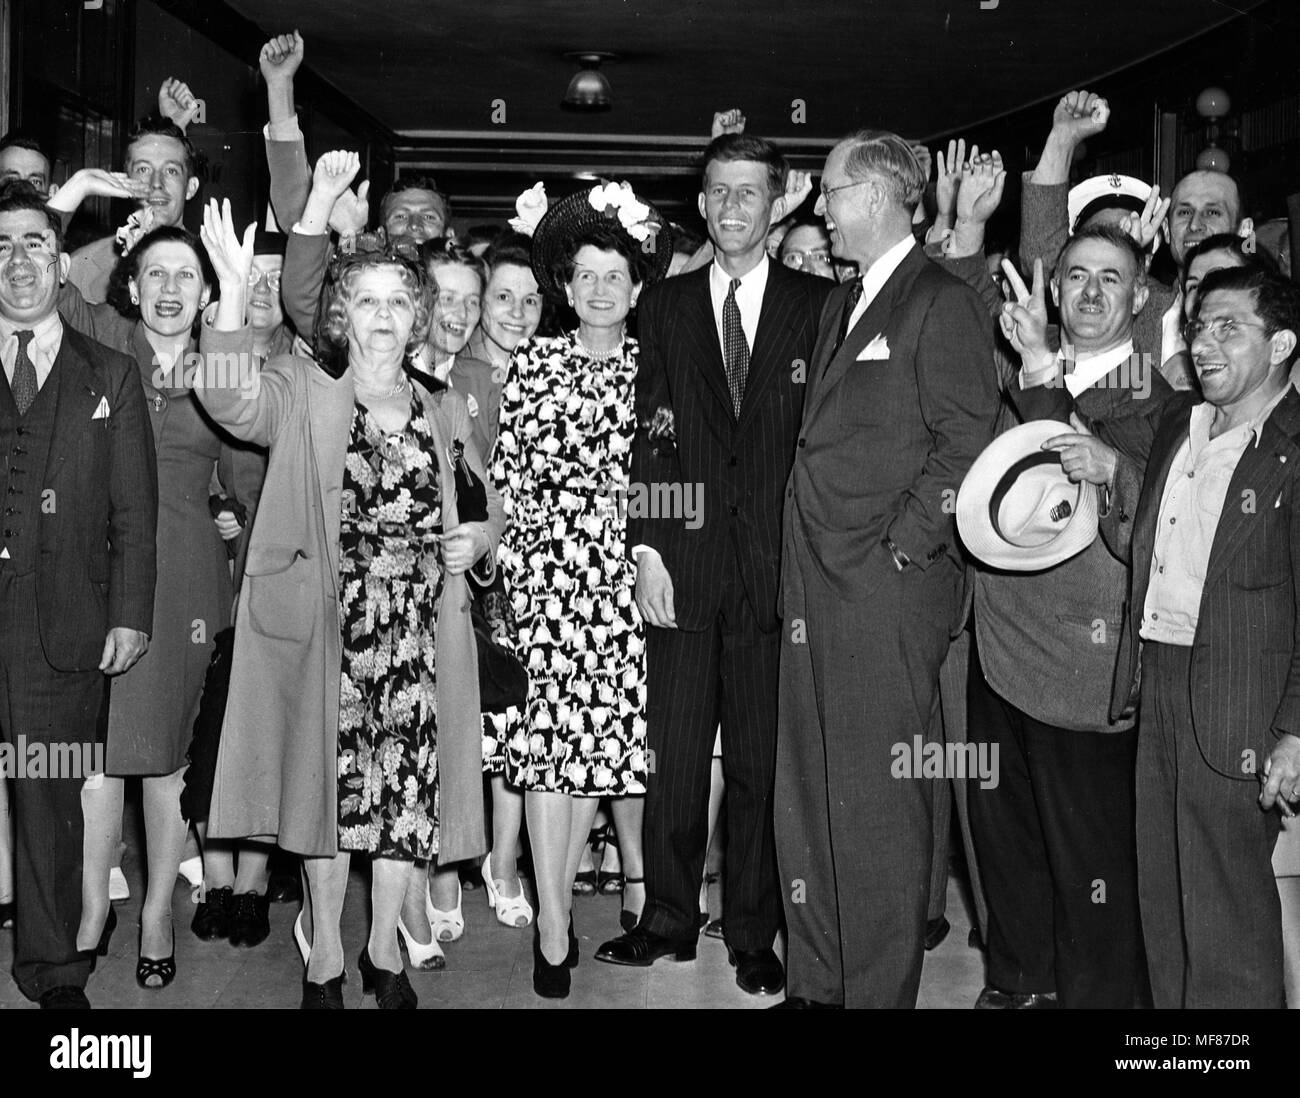 PC363   18 June 1946  Boston Surrounded by supporters, including his mother Rose Fitzgerald Kennedy and his father Joseph P. Kennedy, John F. Kennedy celebrates his Democratic nomination for Massachusetts' 11th Congressional District, Boston. John F. Kennedy wins the Democratic nomination for Massachusetts' 11th Congressional District. Photograph in the John Fitzgerald Kennedy Library, Boston. Stock Photo